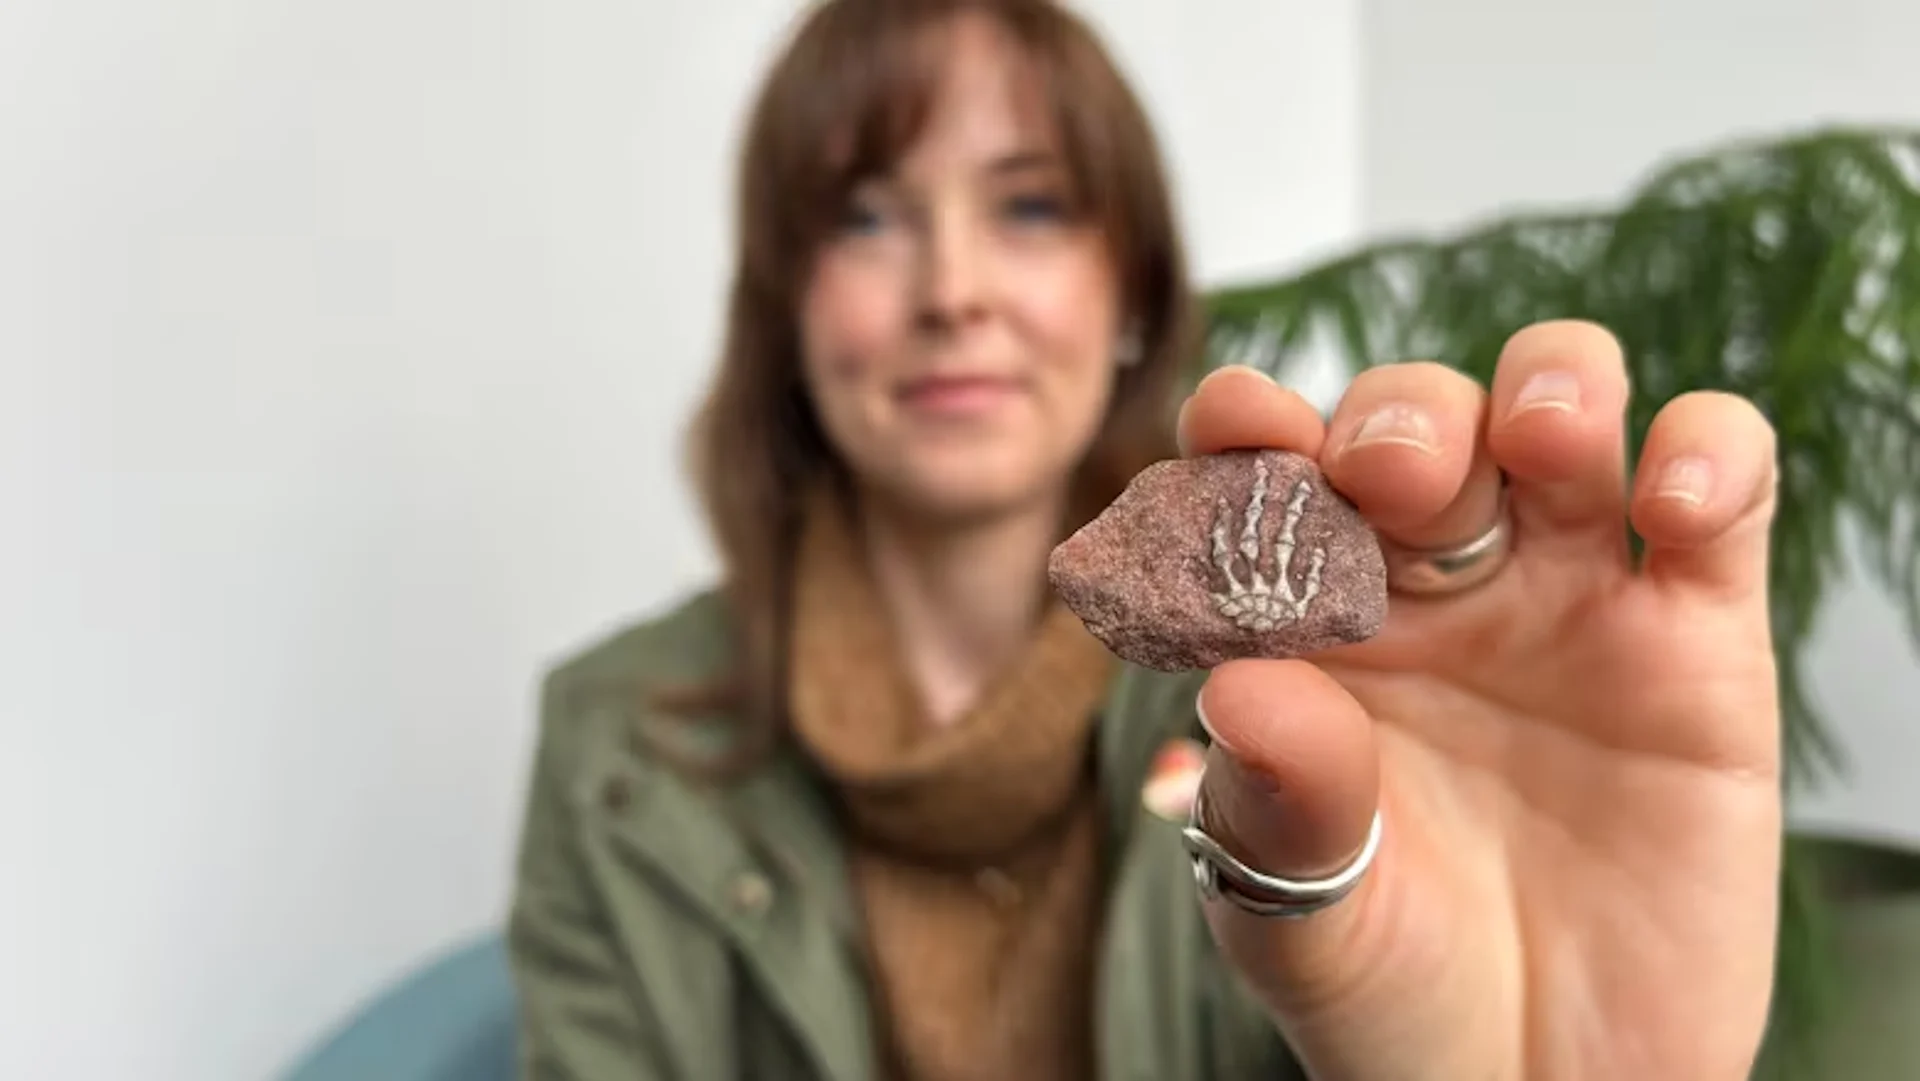 A walk on the beach was no ordinary stroll for a P.E.I. woman who stumbled upon a fossil that could be 290 million years old